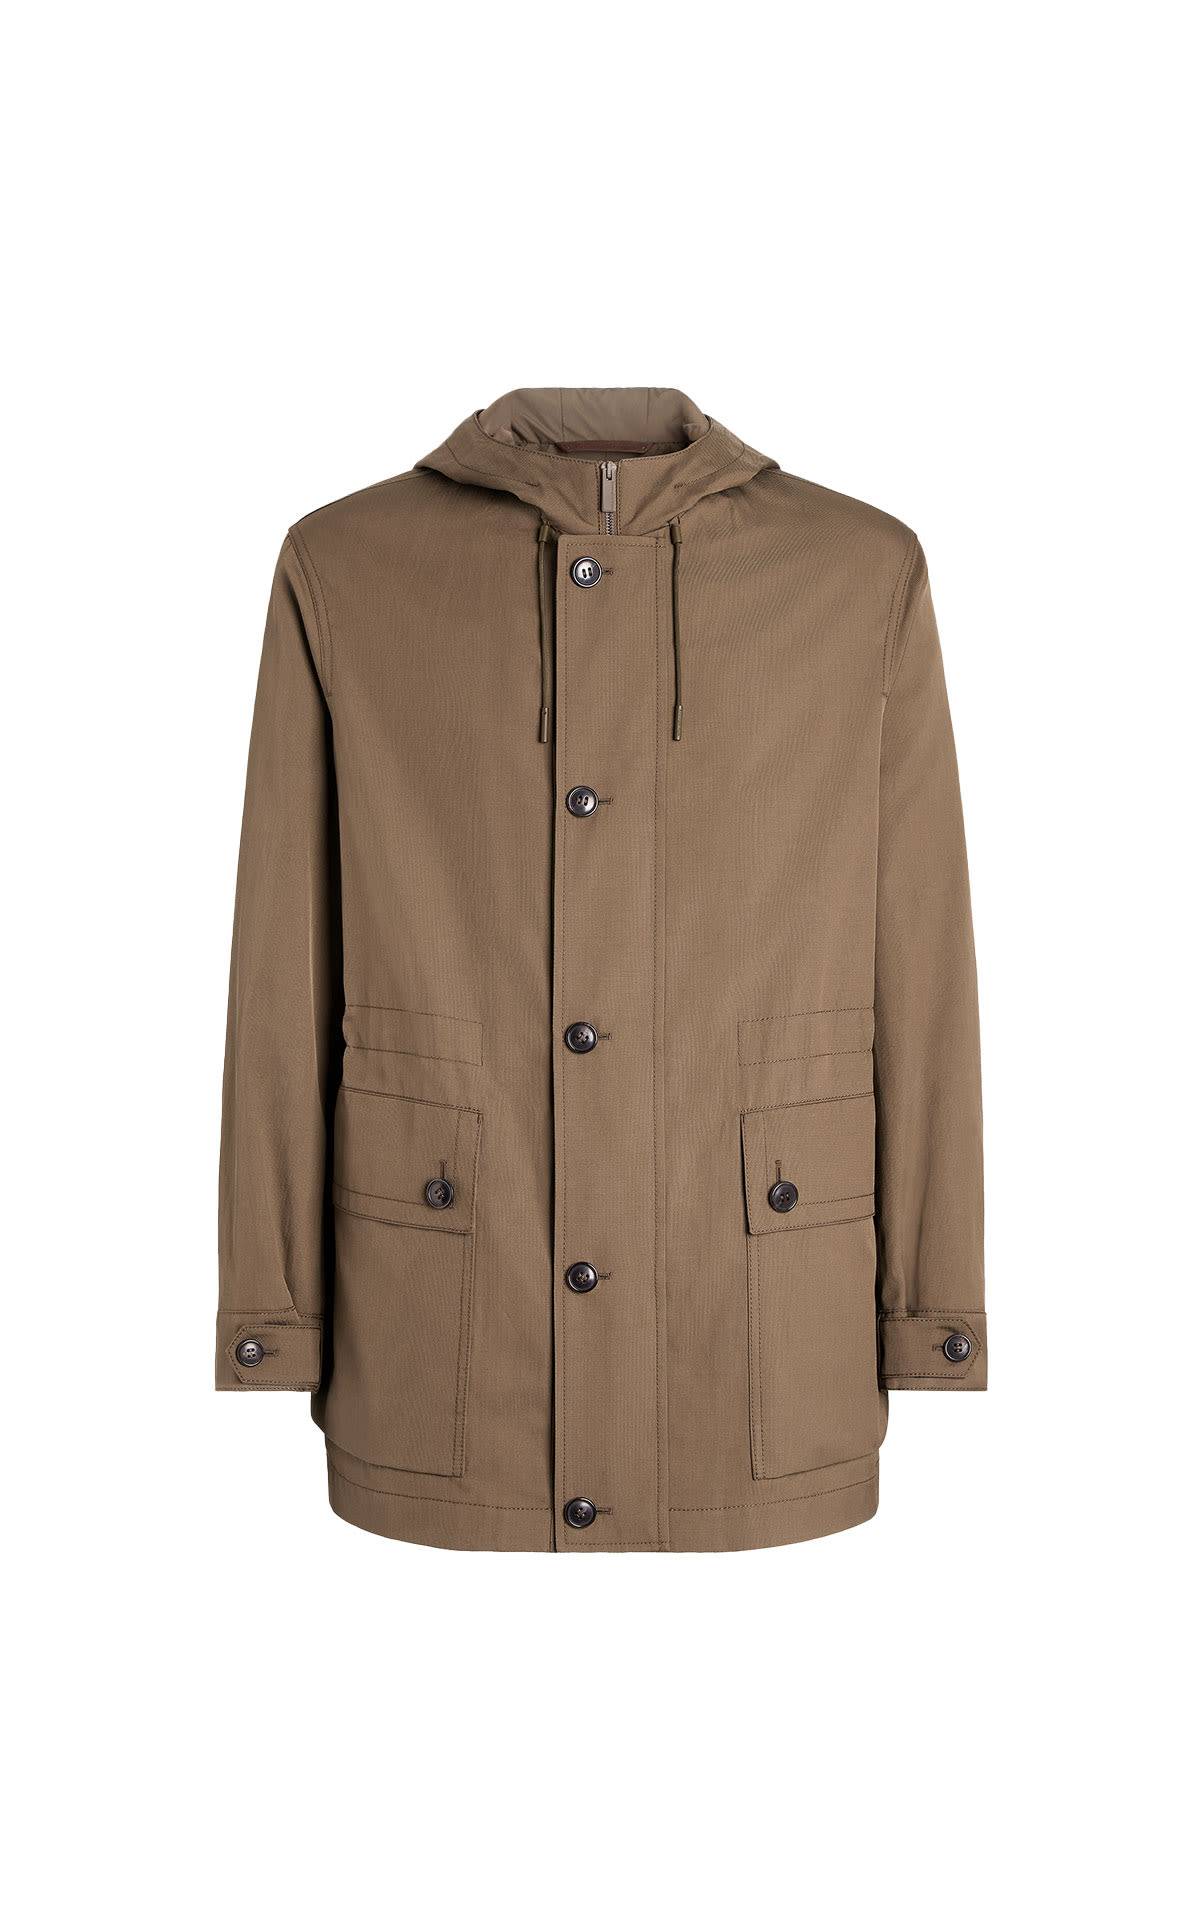 Zegna Outerwear long from Bicester Village